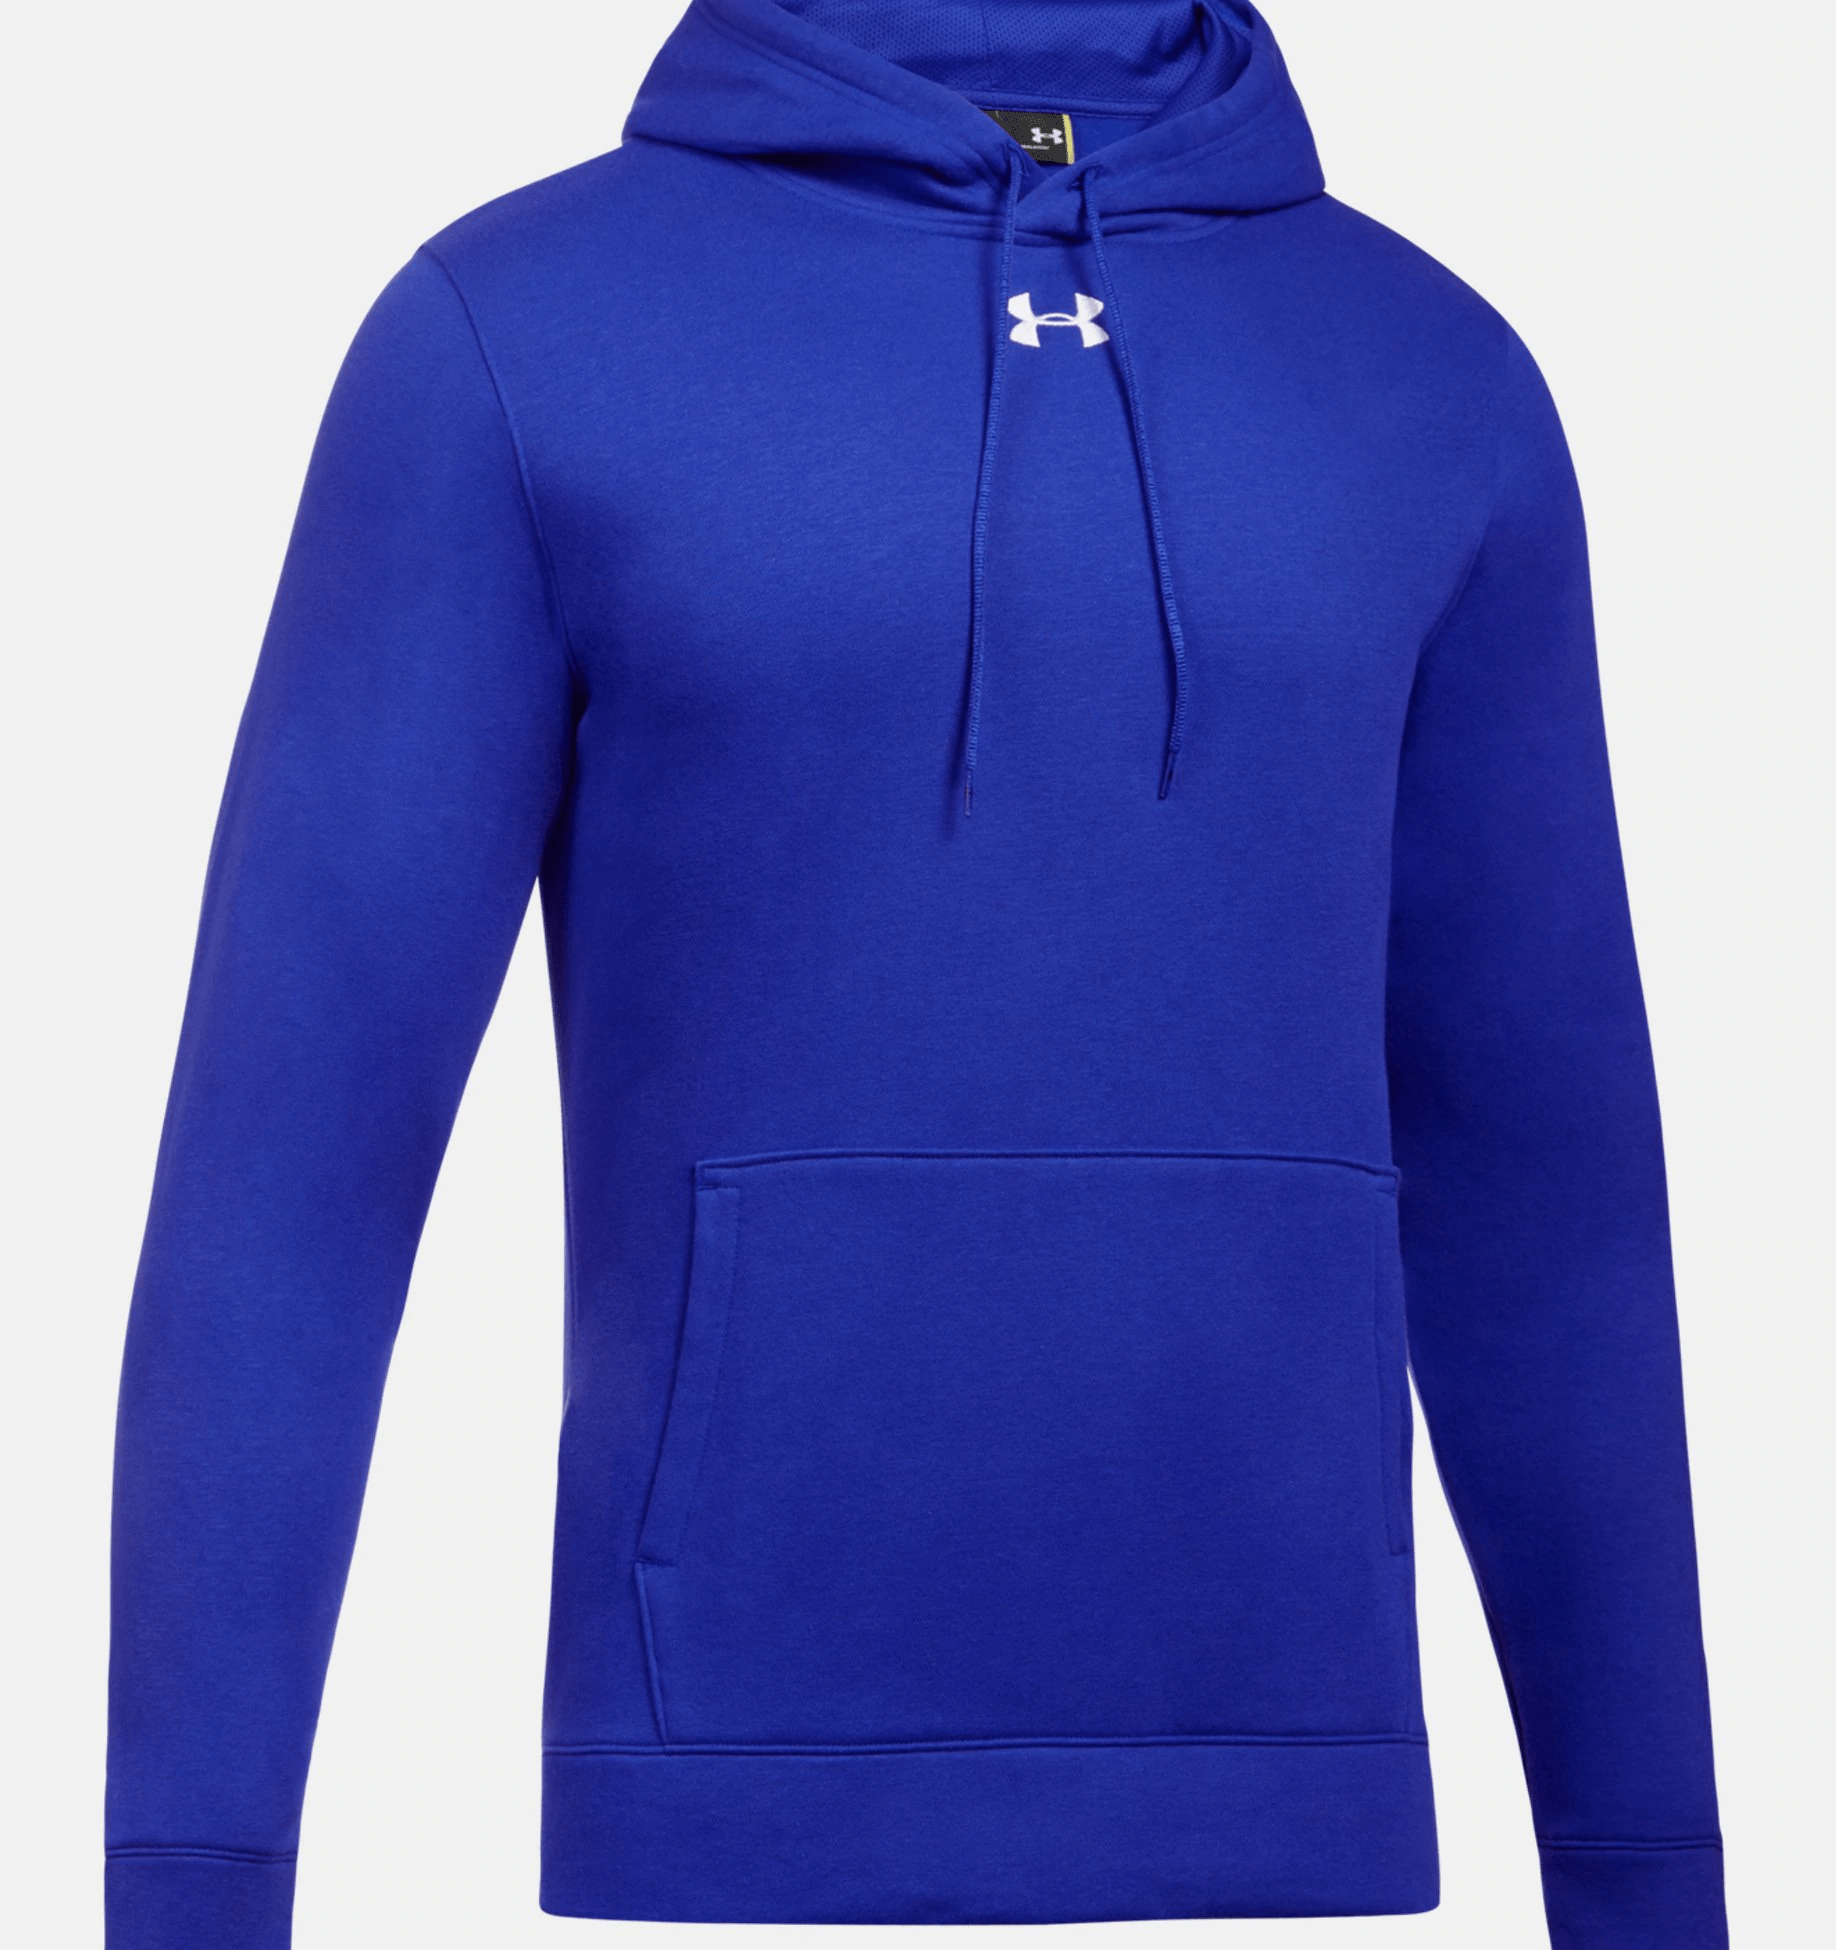 Under Armour Hustle Fleece Hoodie Big & Tall Sizes - 1300123 - Assorted  Colours - Royal Blue 400 / 4XL